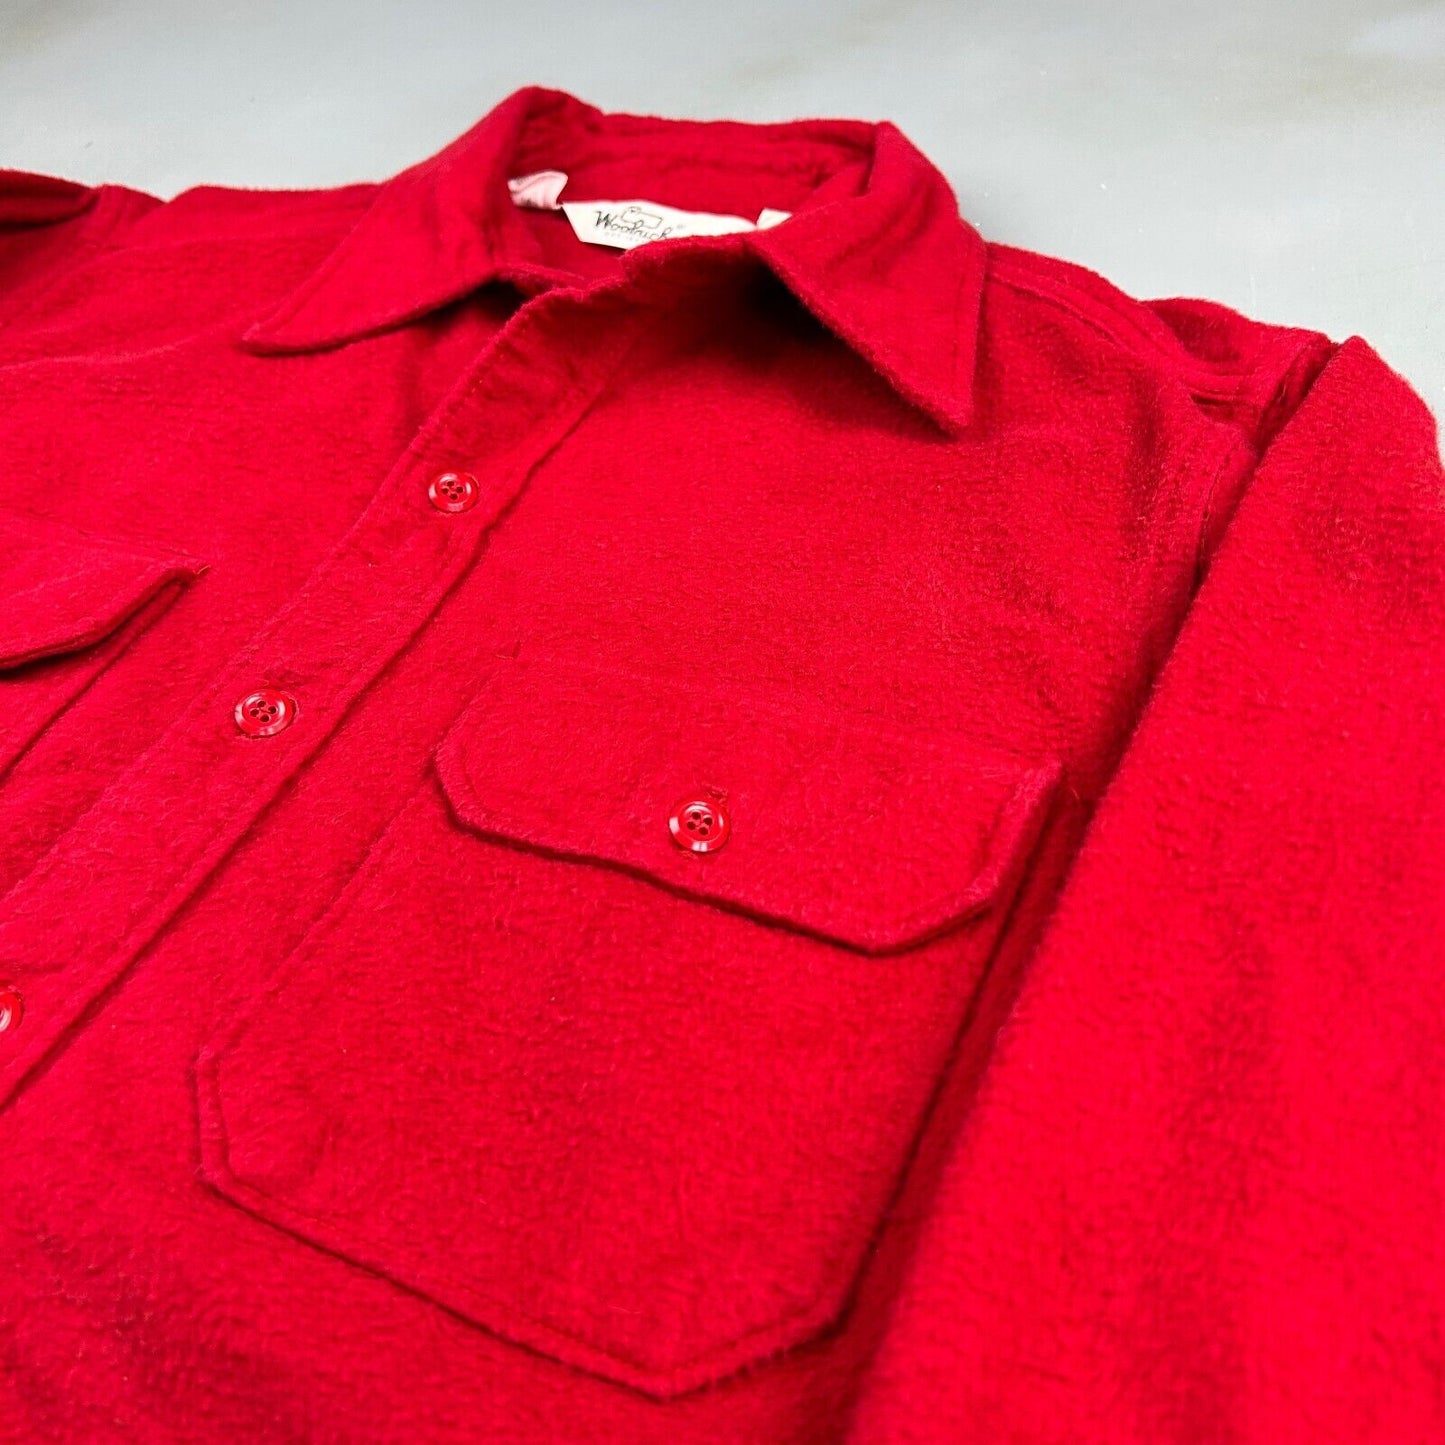 VINTAGE 90s Woolrich Red Cotton Cloth Button Up Shirt sz Large Adult